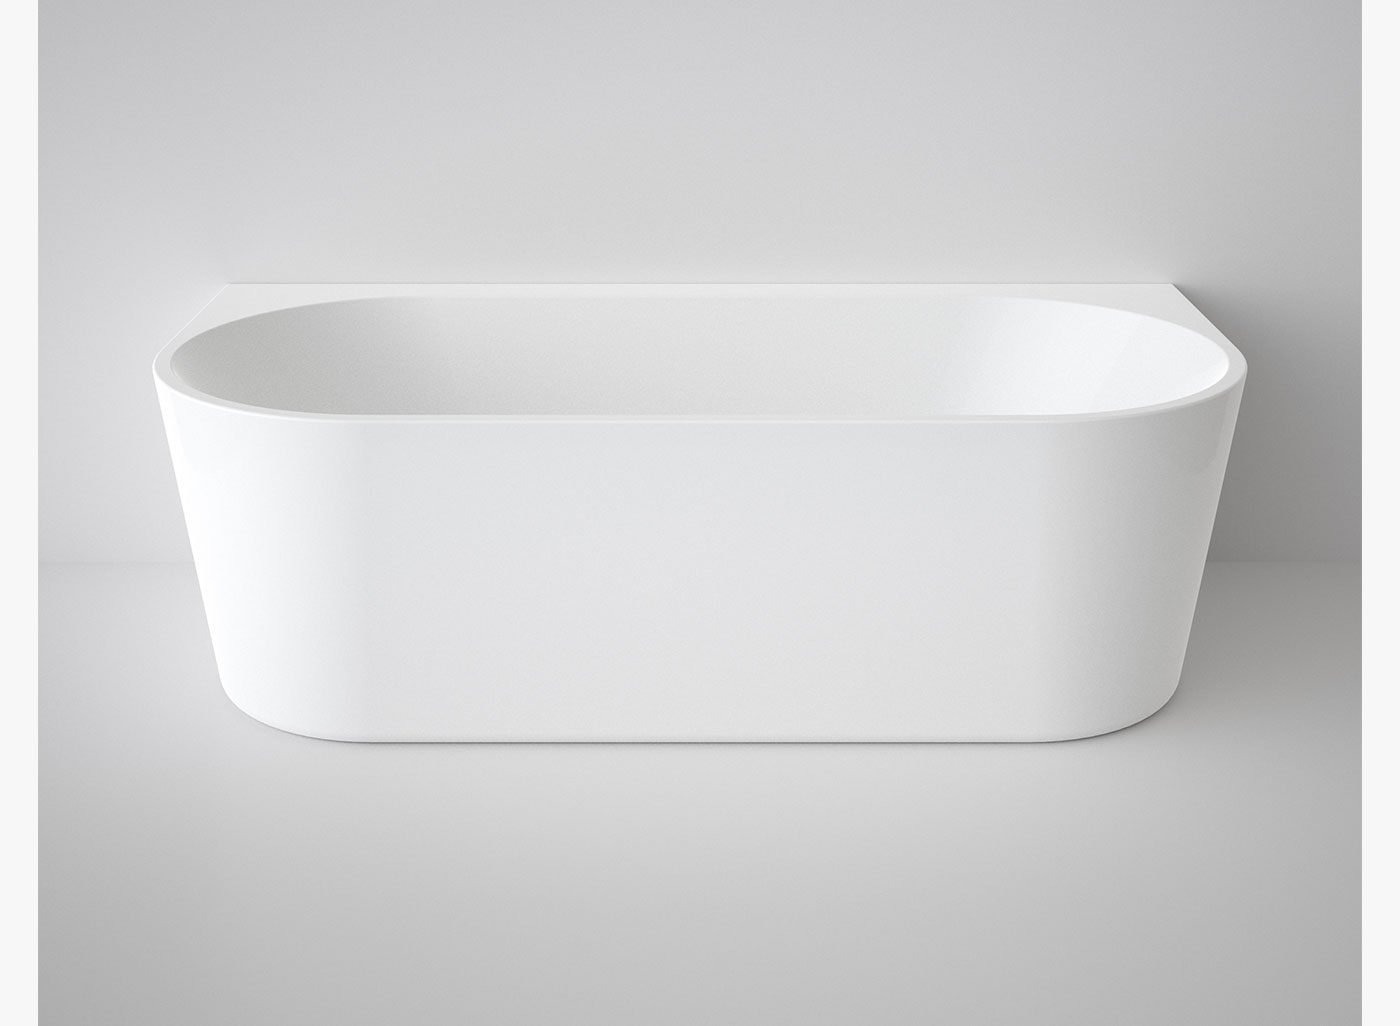 is perfect for bathrooms limited in space. A seamless design with minimalist styling